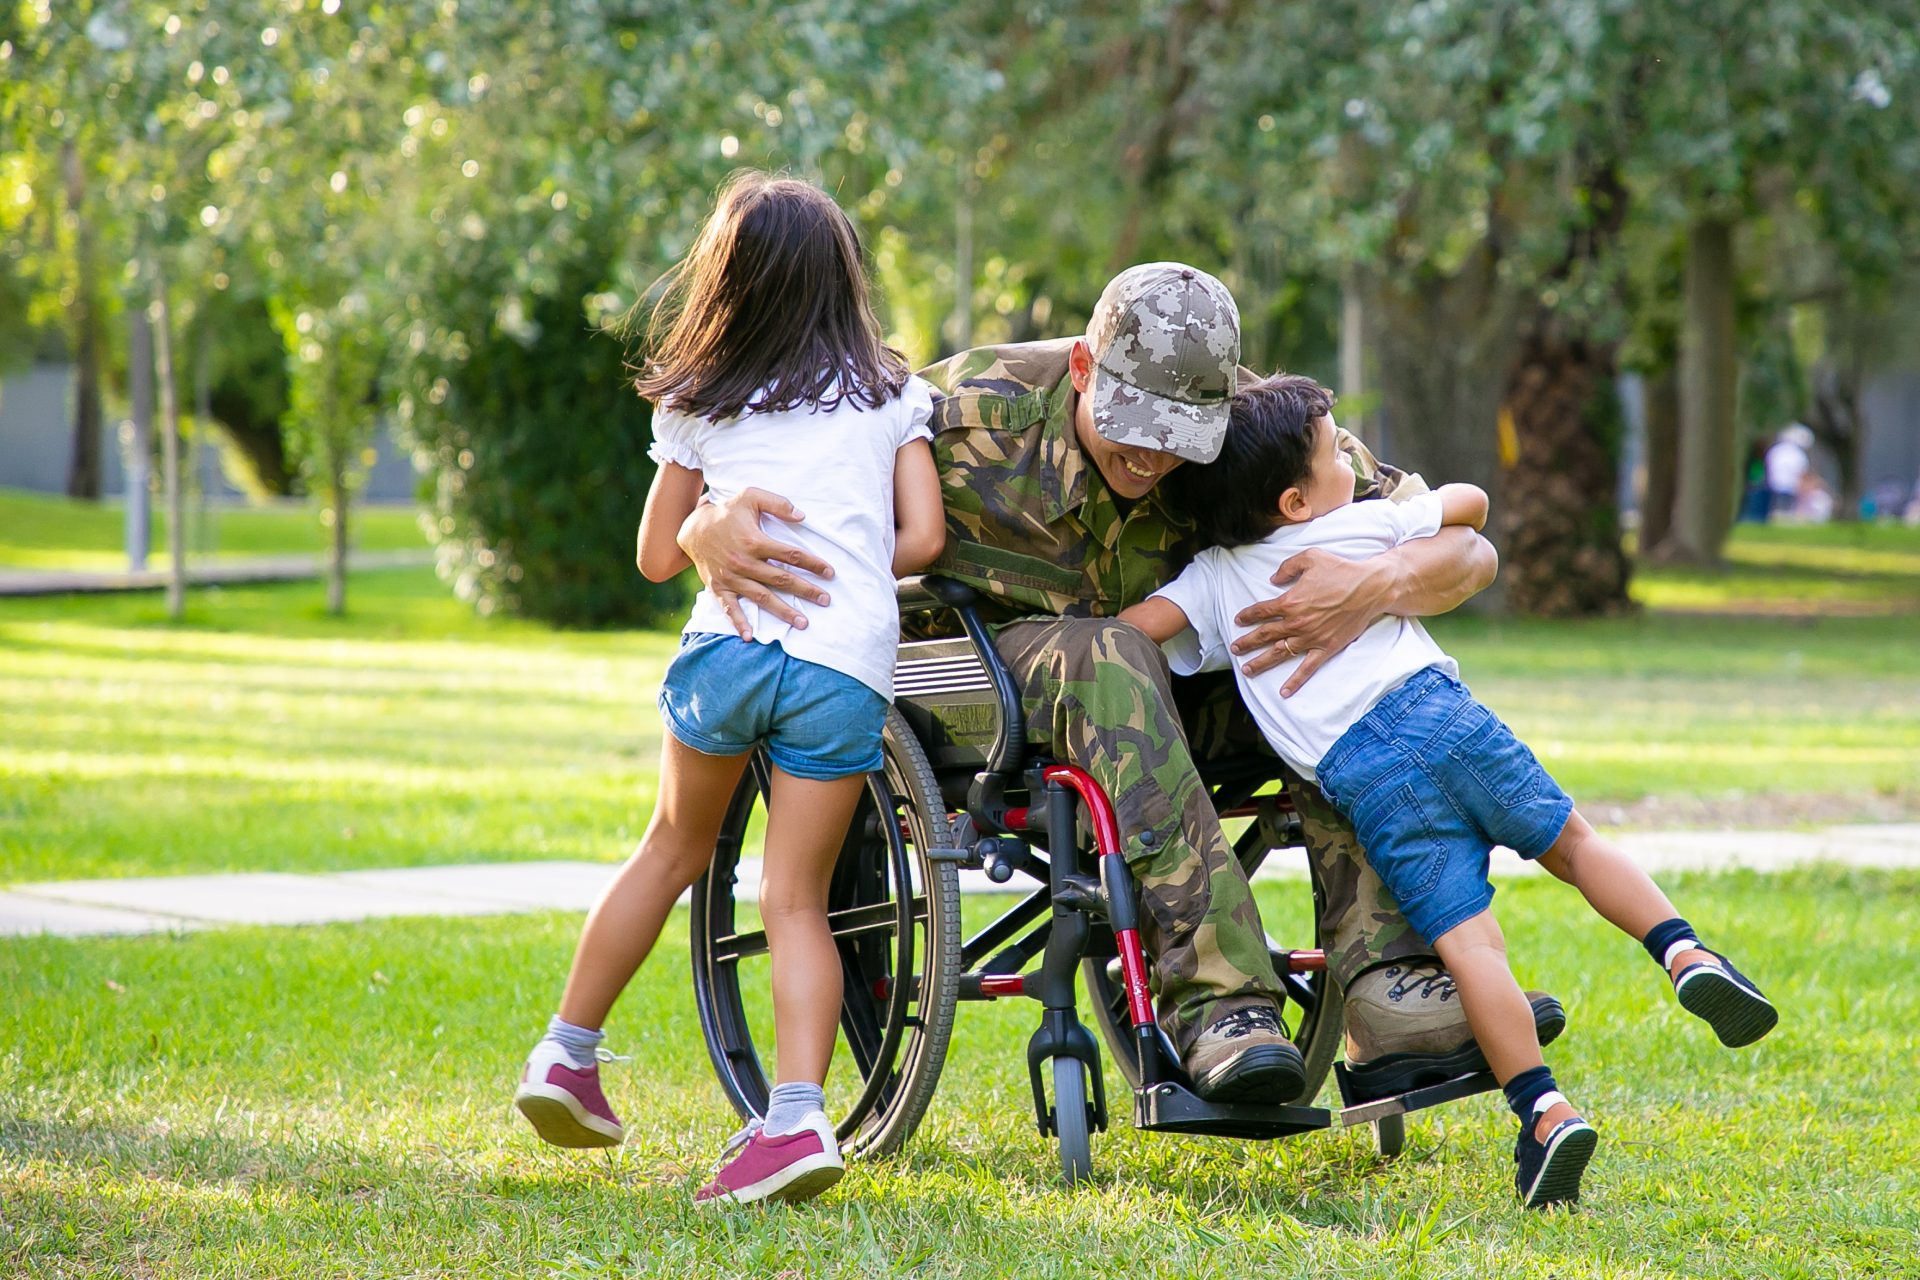 A wounded veteran hugging his children in a park